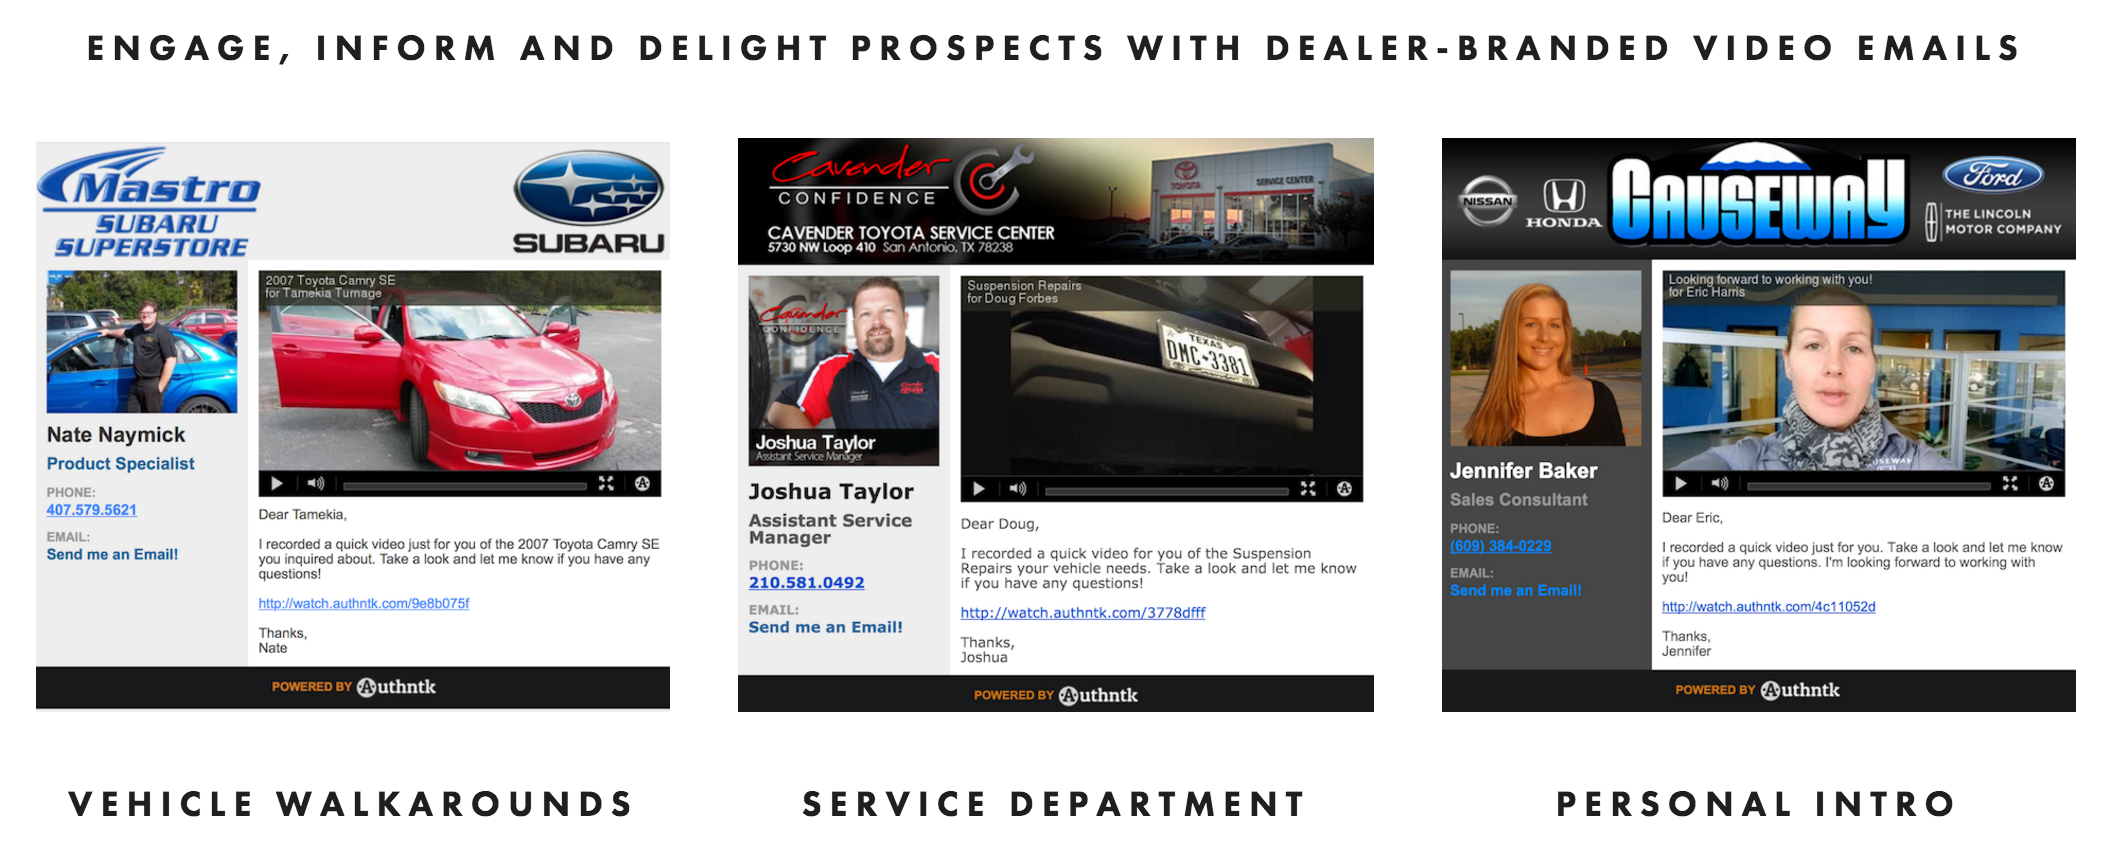 Engage, inform, and delight customers with dealer-branded video emails